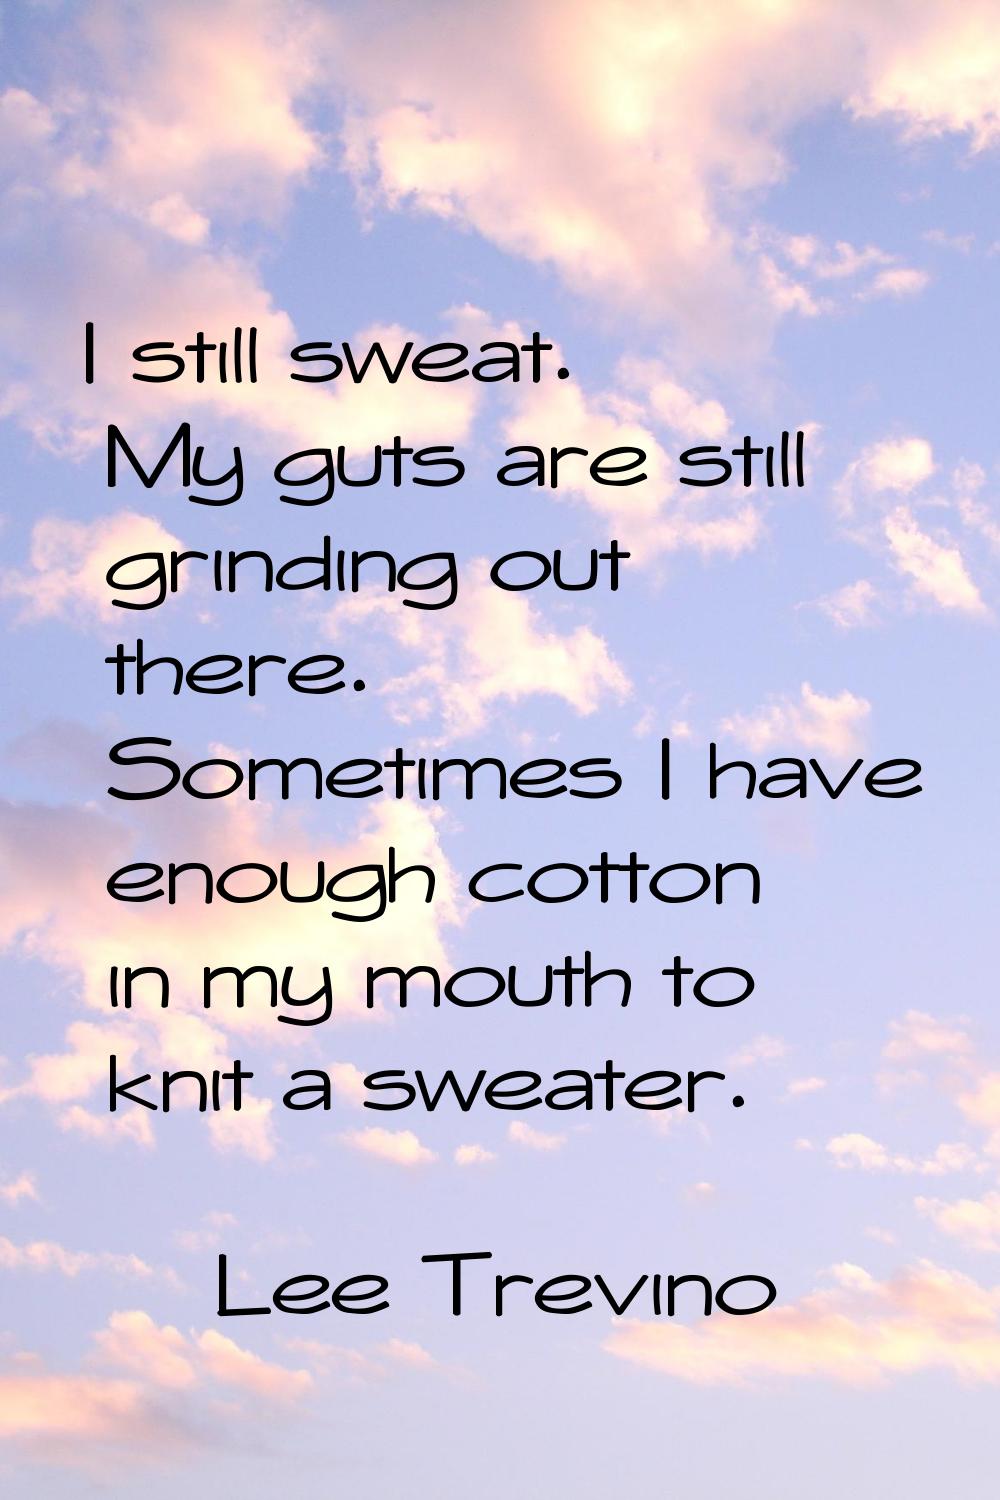 I still sweat. My guts are still grinding out there. Sometimes I have enough cotton in my mouth to 